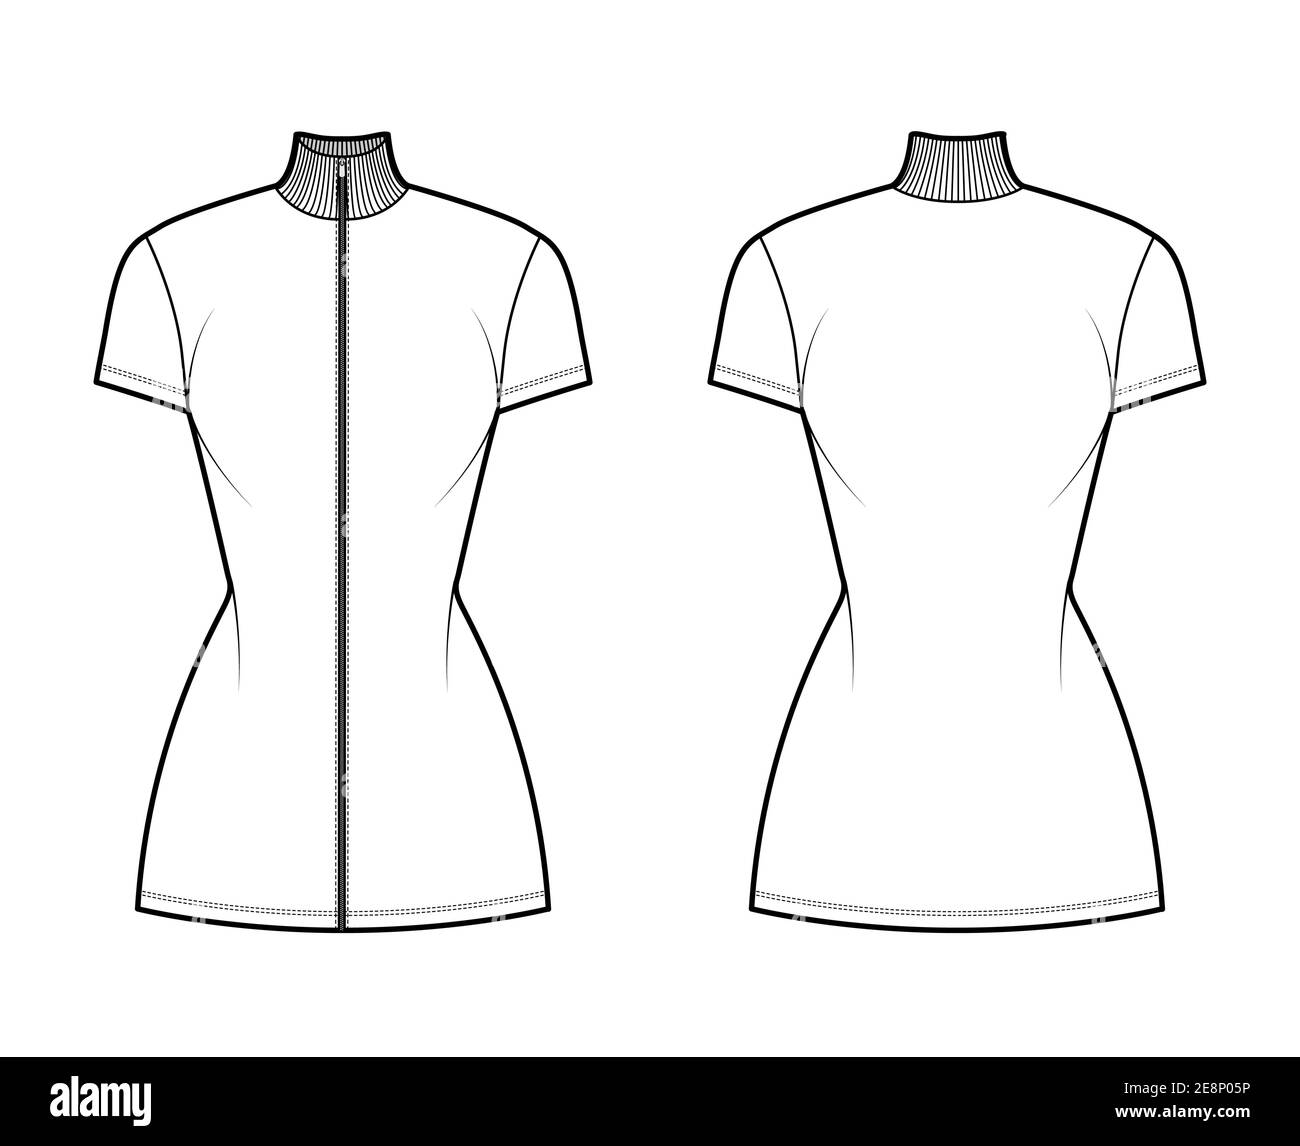 Turtleneck zip-up dress technical fashion illustration with short sleeves, mini length, fitted body, Pencil fullness. Flat apparel template front, back, white color. Women, men unisex CAD mockup Stock Vector